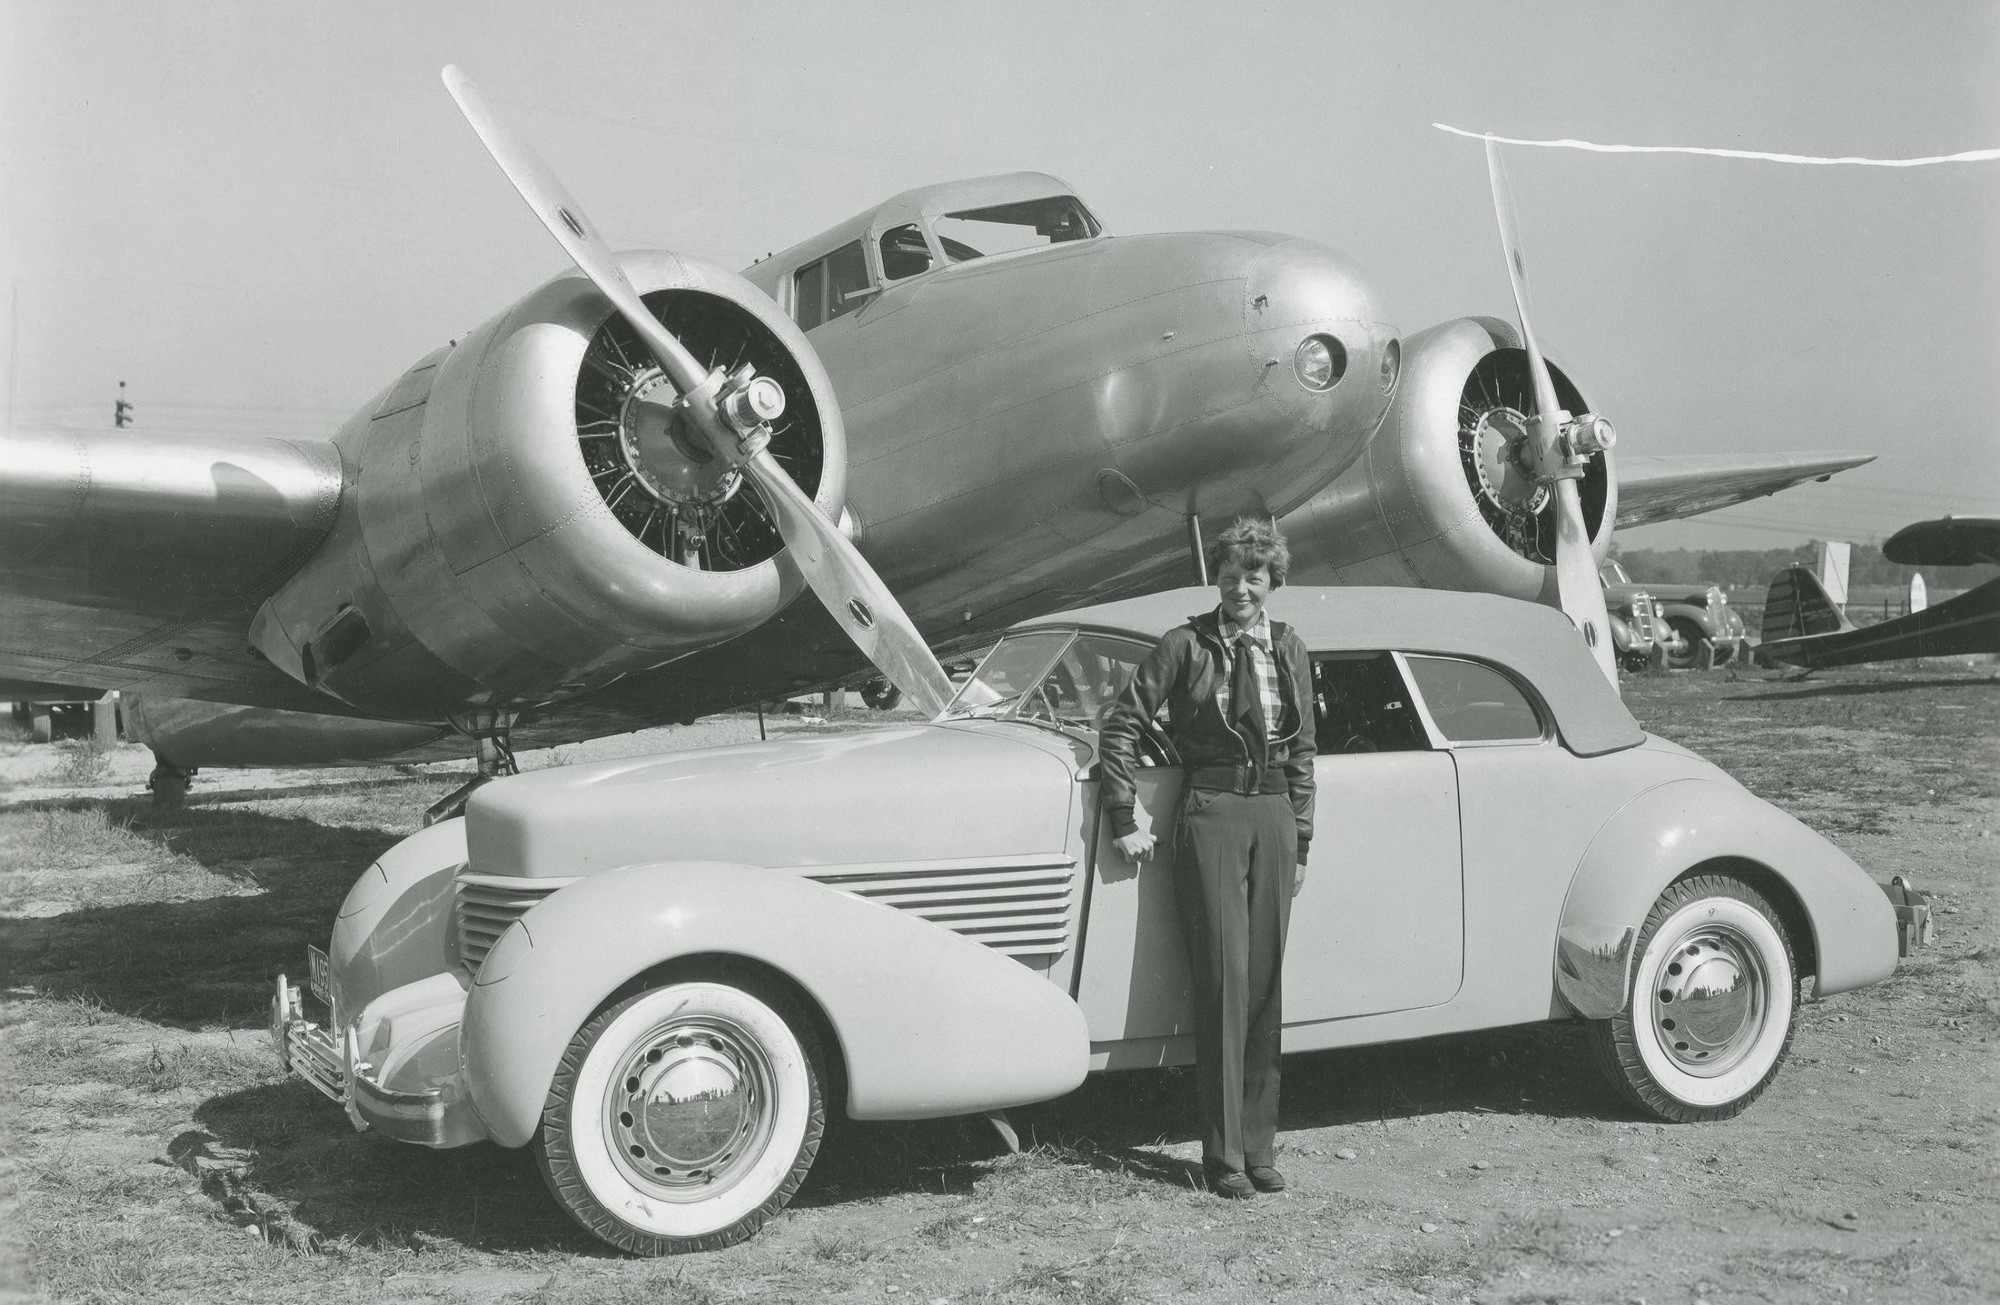 Amelia Earhart's Once Lost 1937 Cord 812 Phaeton to be Displayed in Washington, D.C.